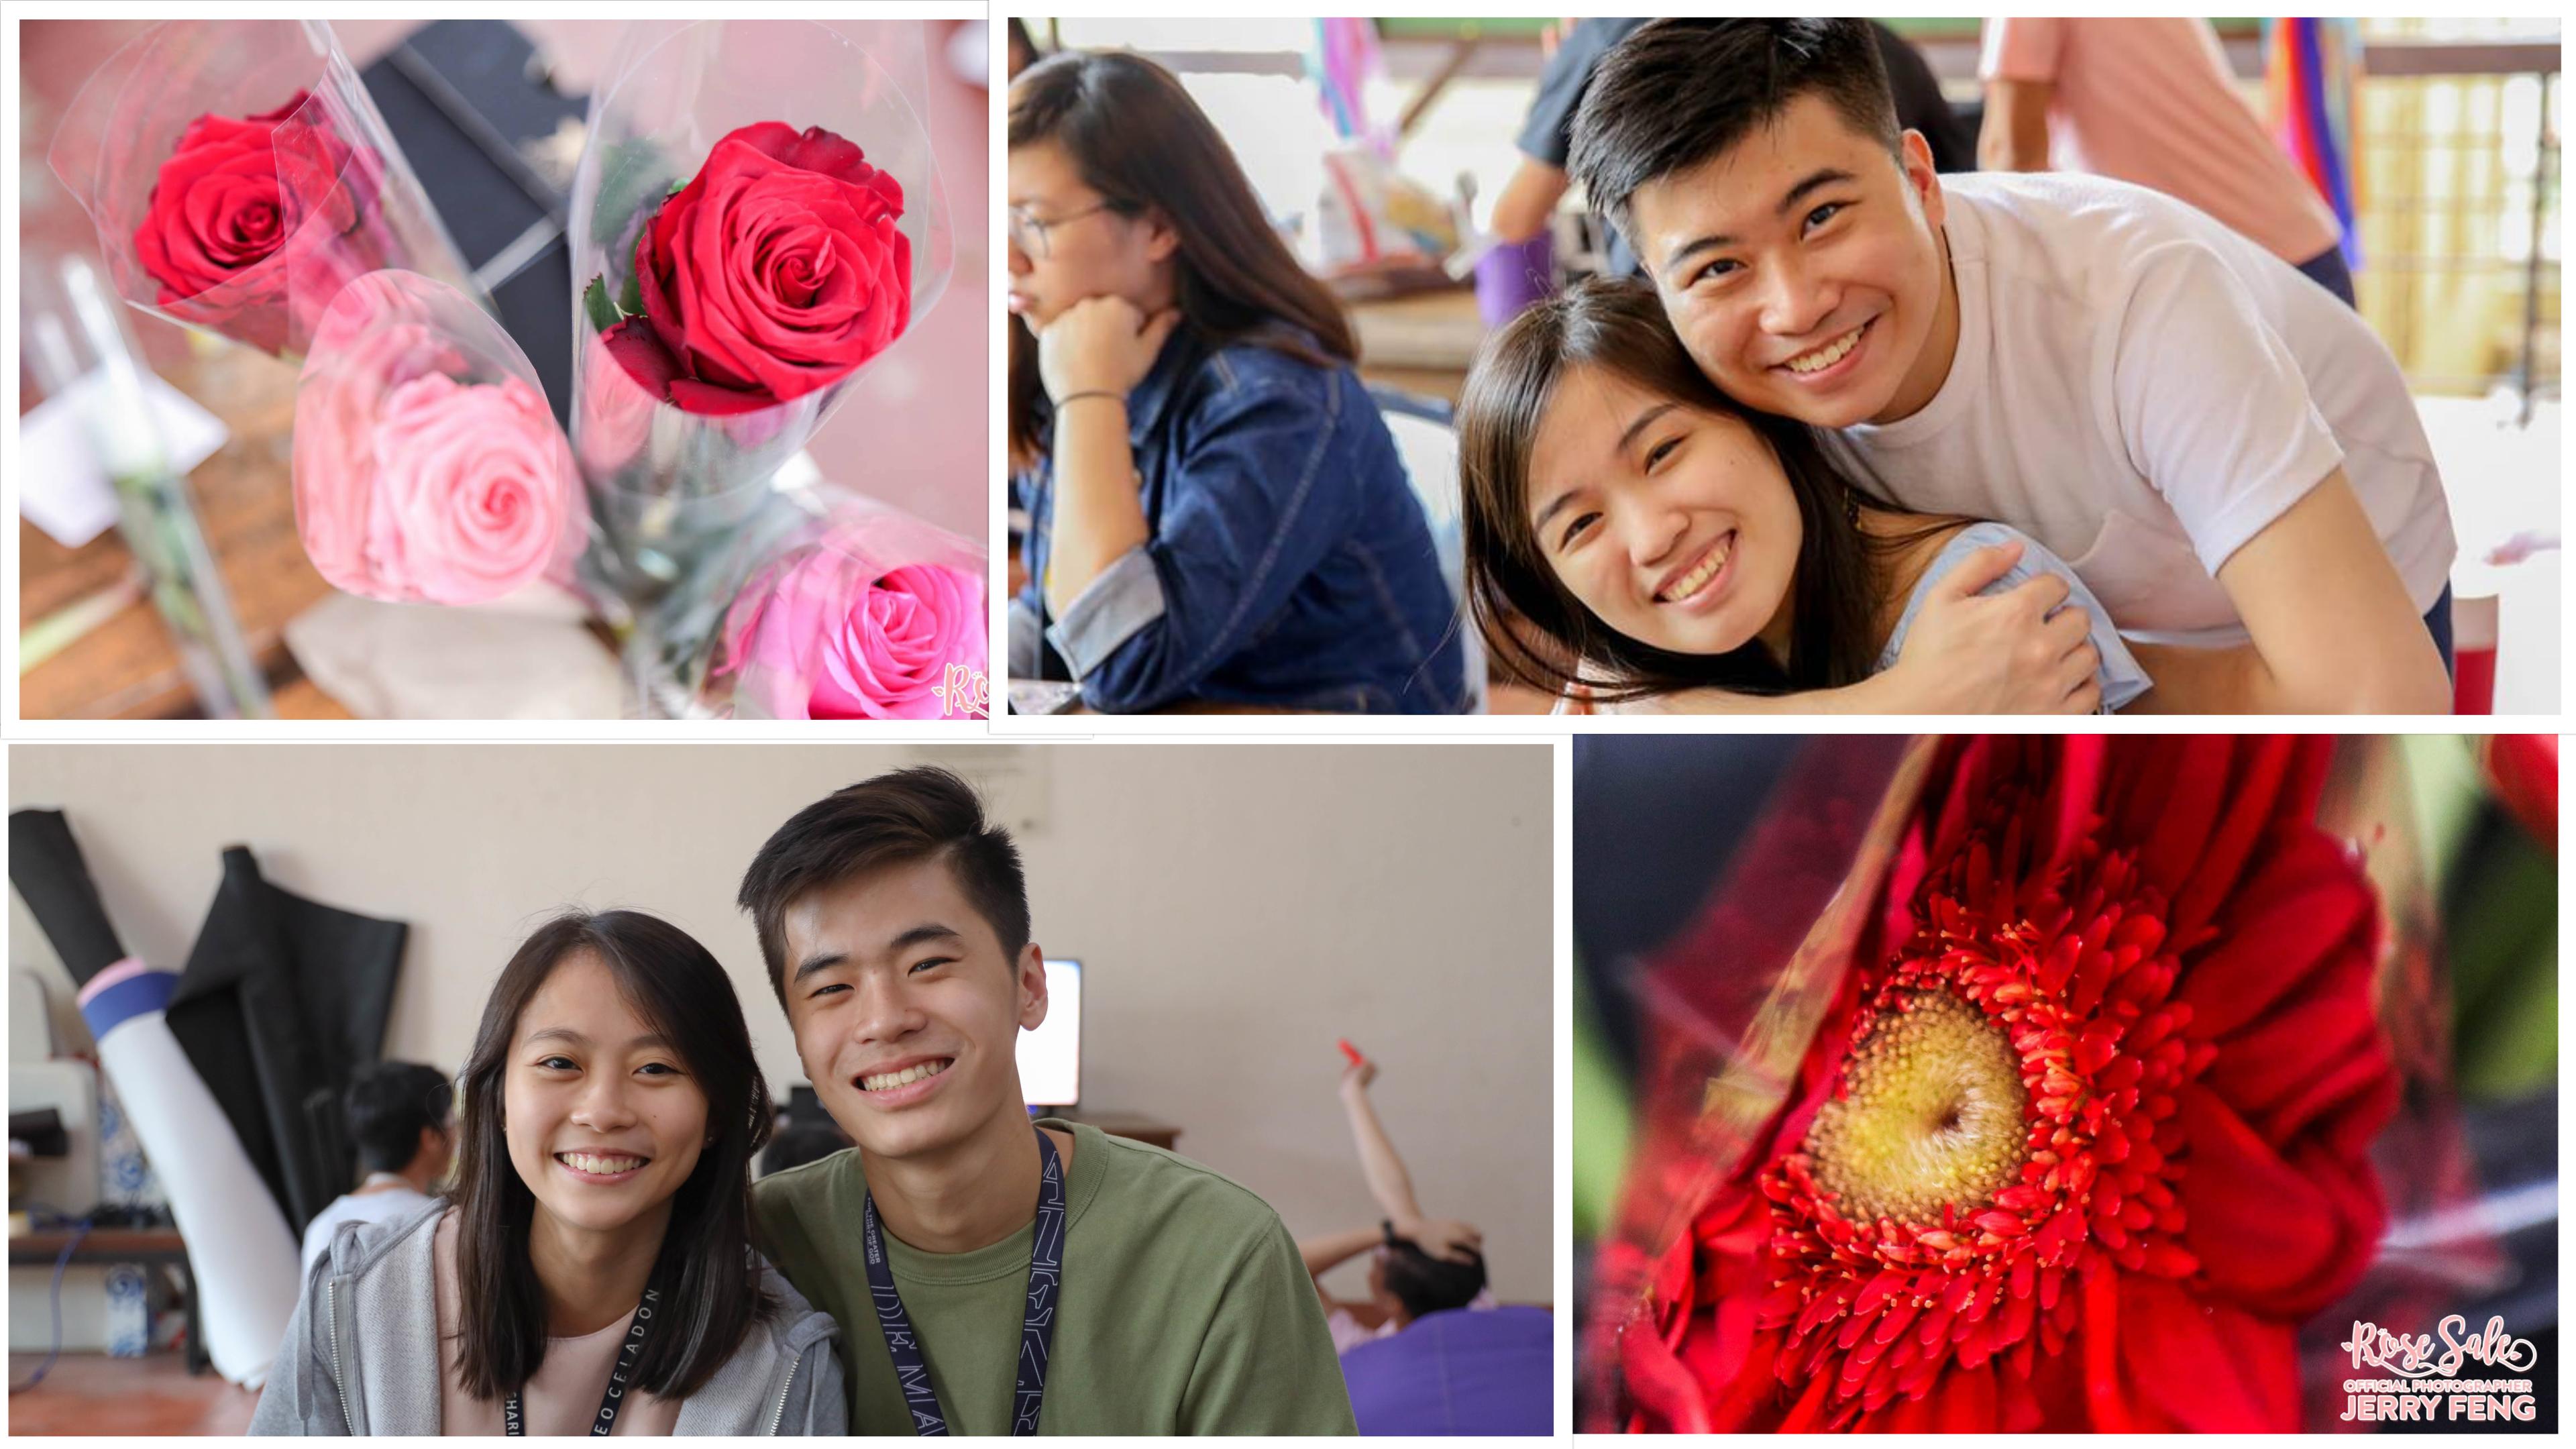 Blooming Attachments: Ateneo Celadon Rose Sale 2019